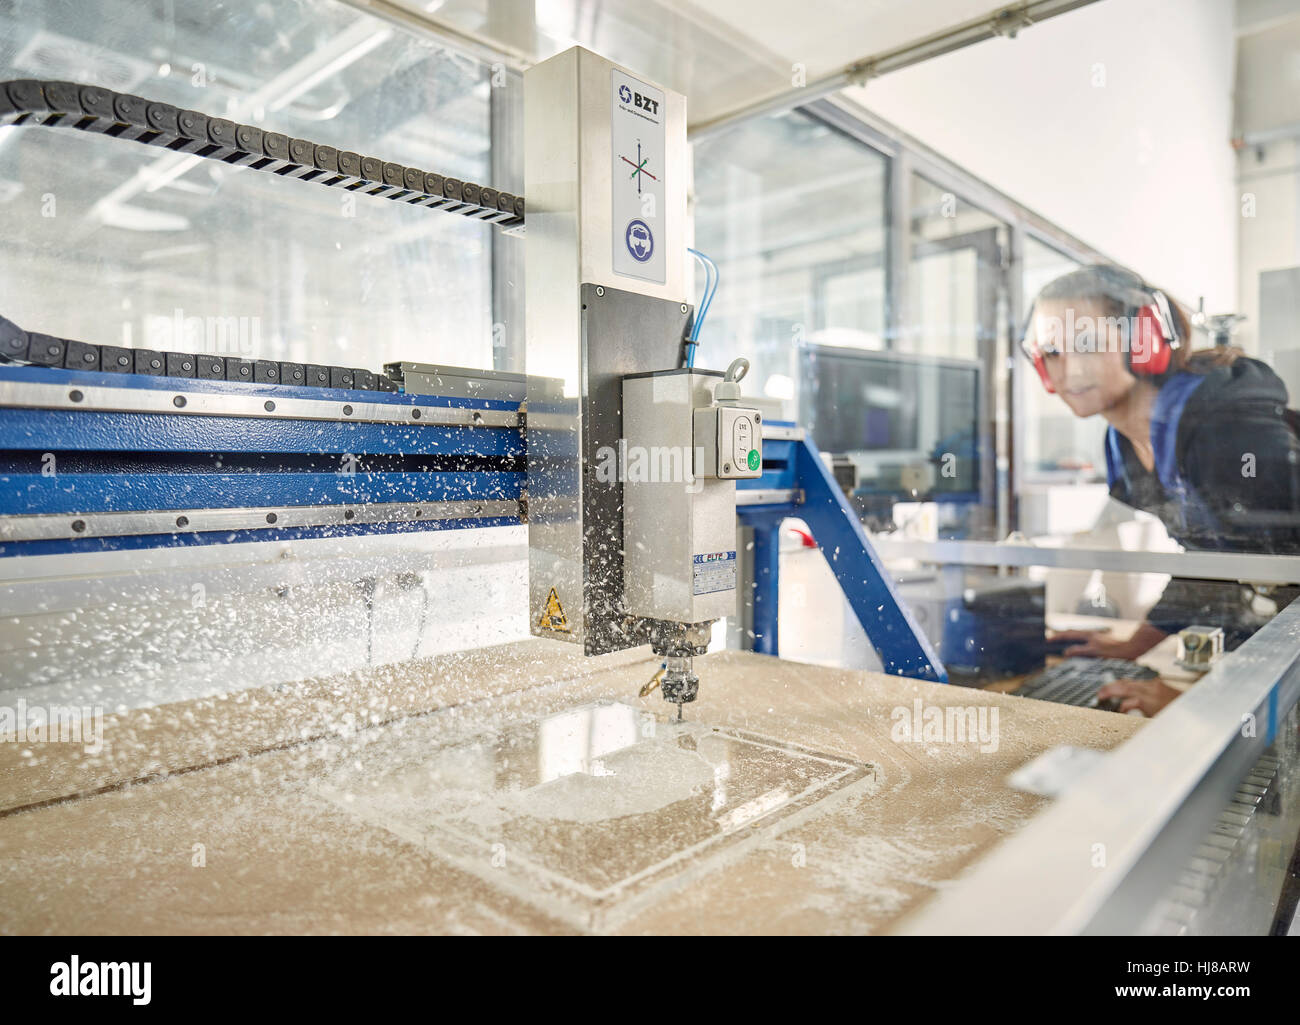 Woman with ear protection operates CNC milling machine, CNC machine, Austria Stock Photo